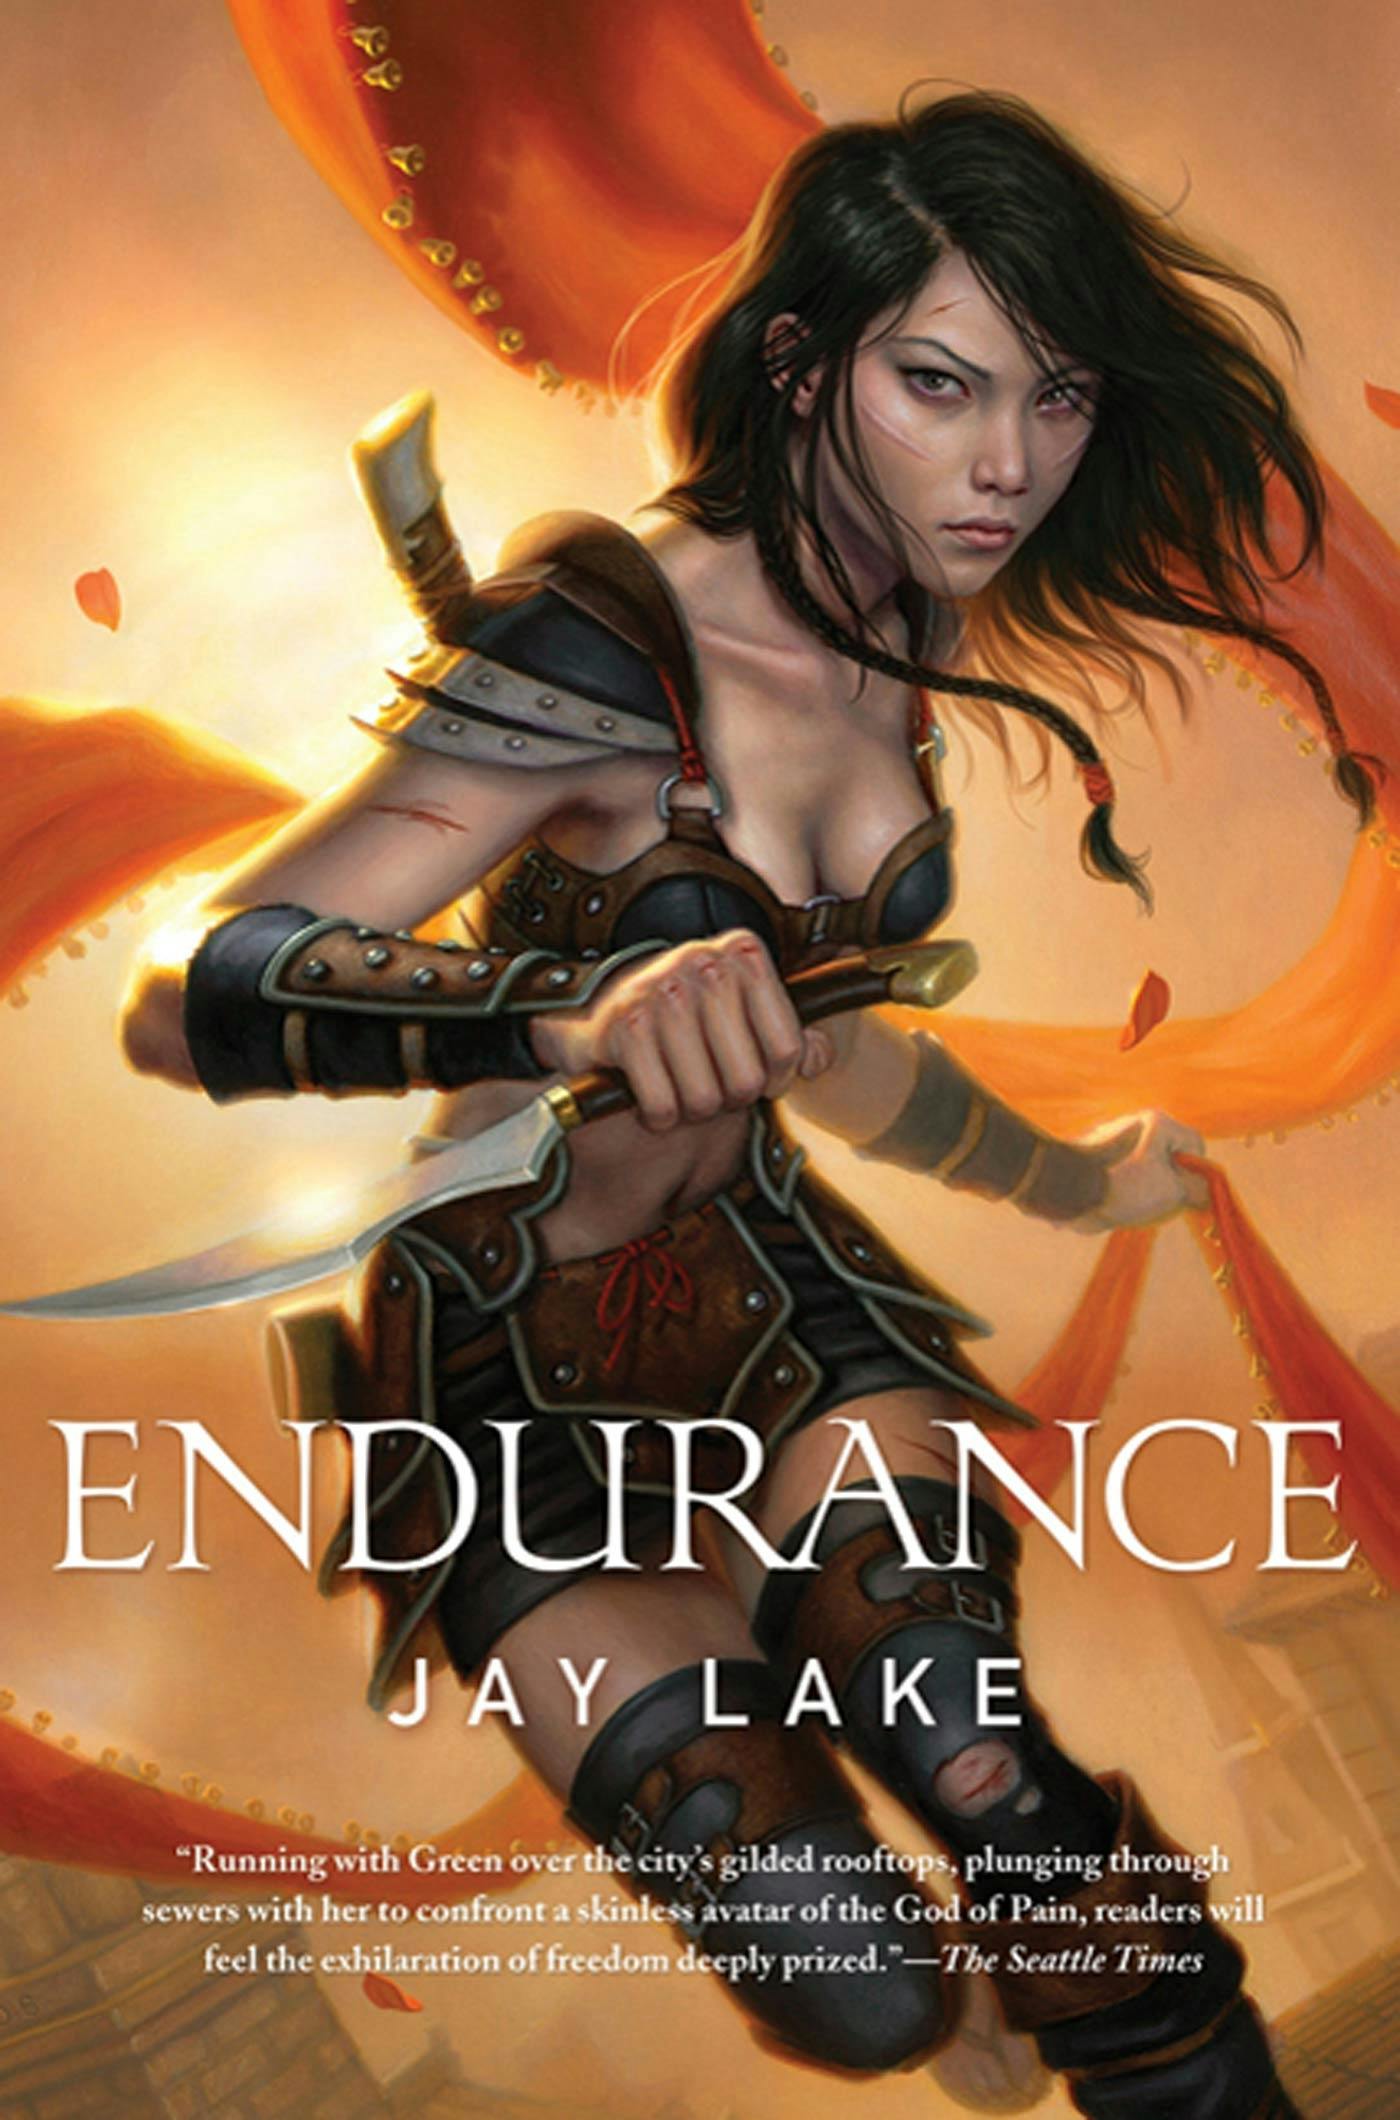 Cover for the book titled as: Endurance